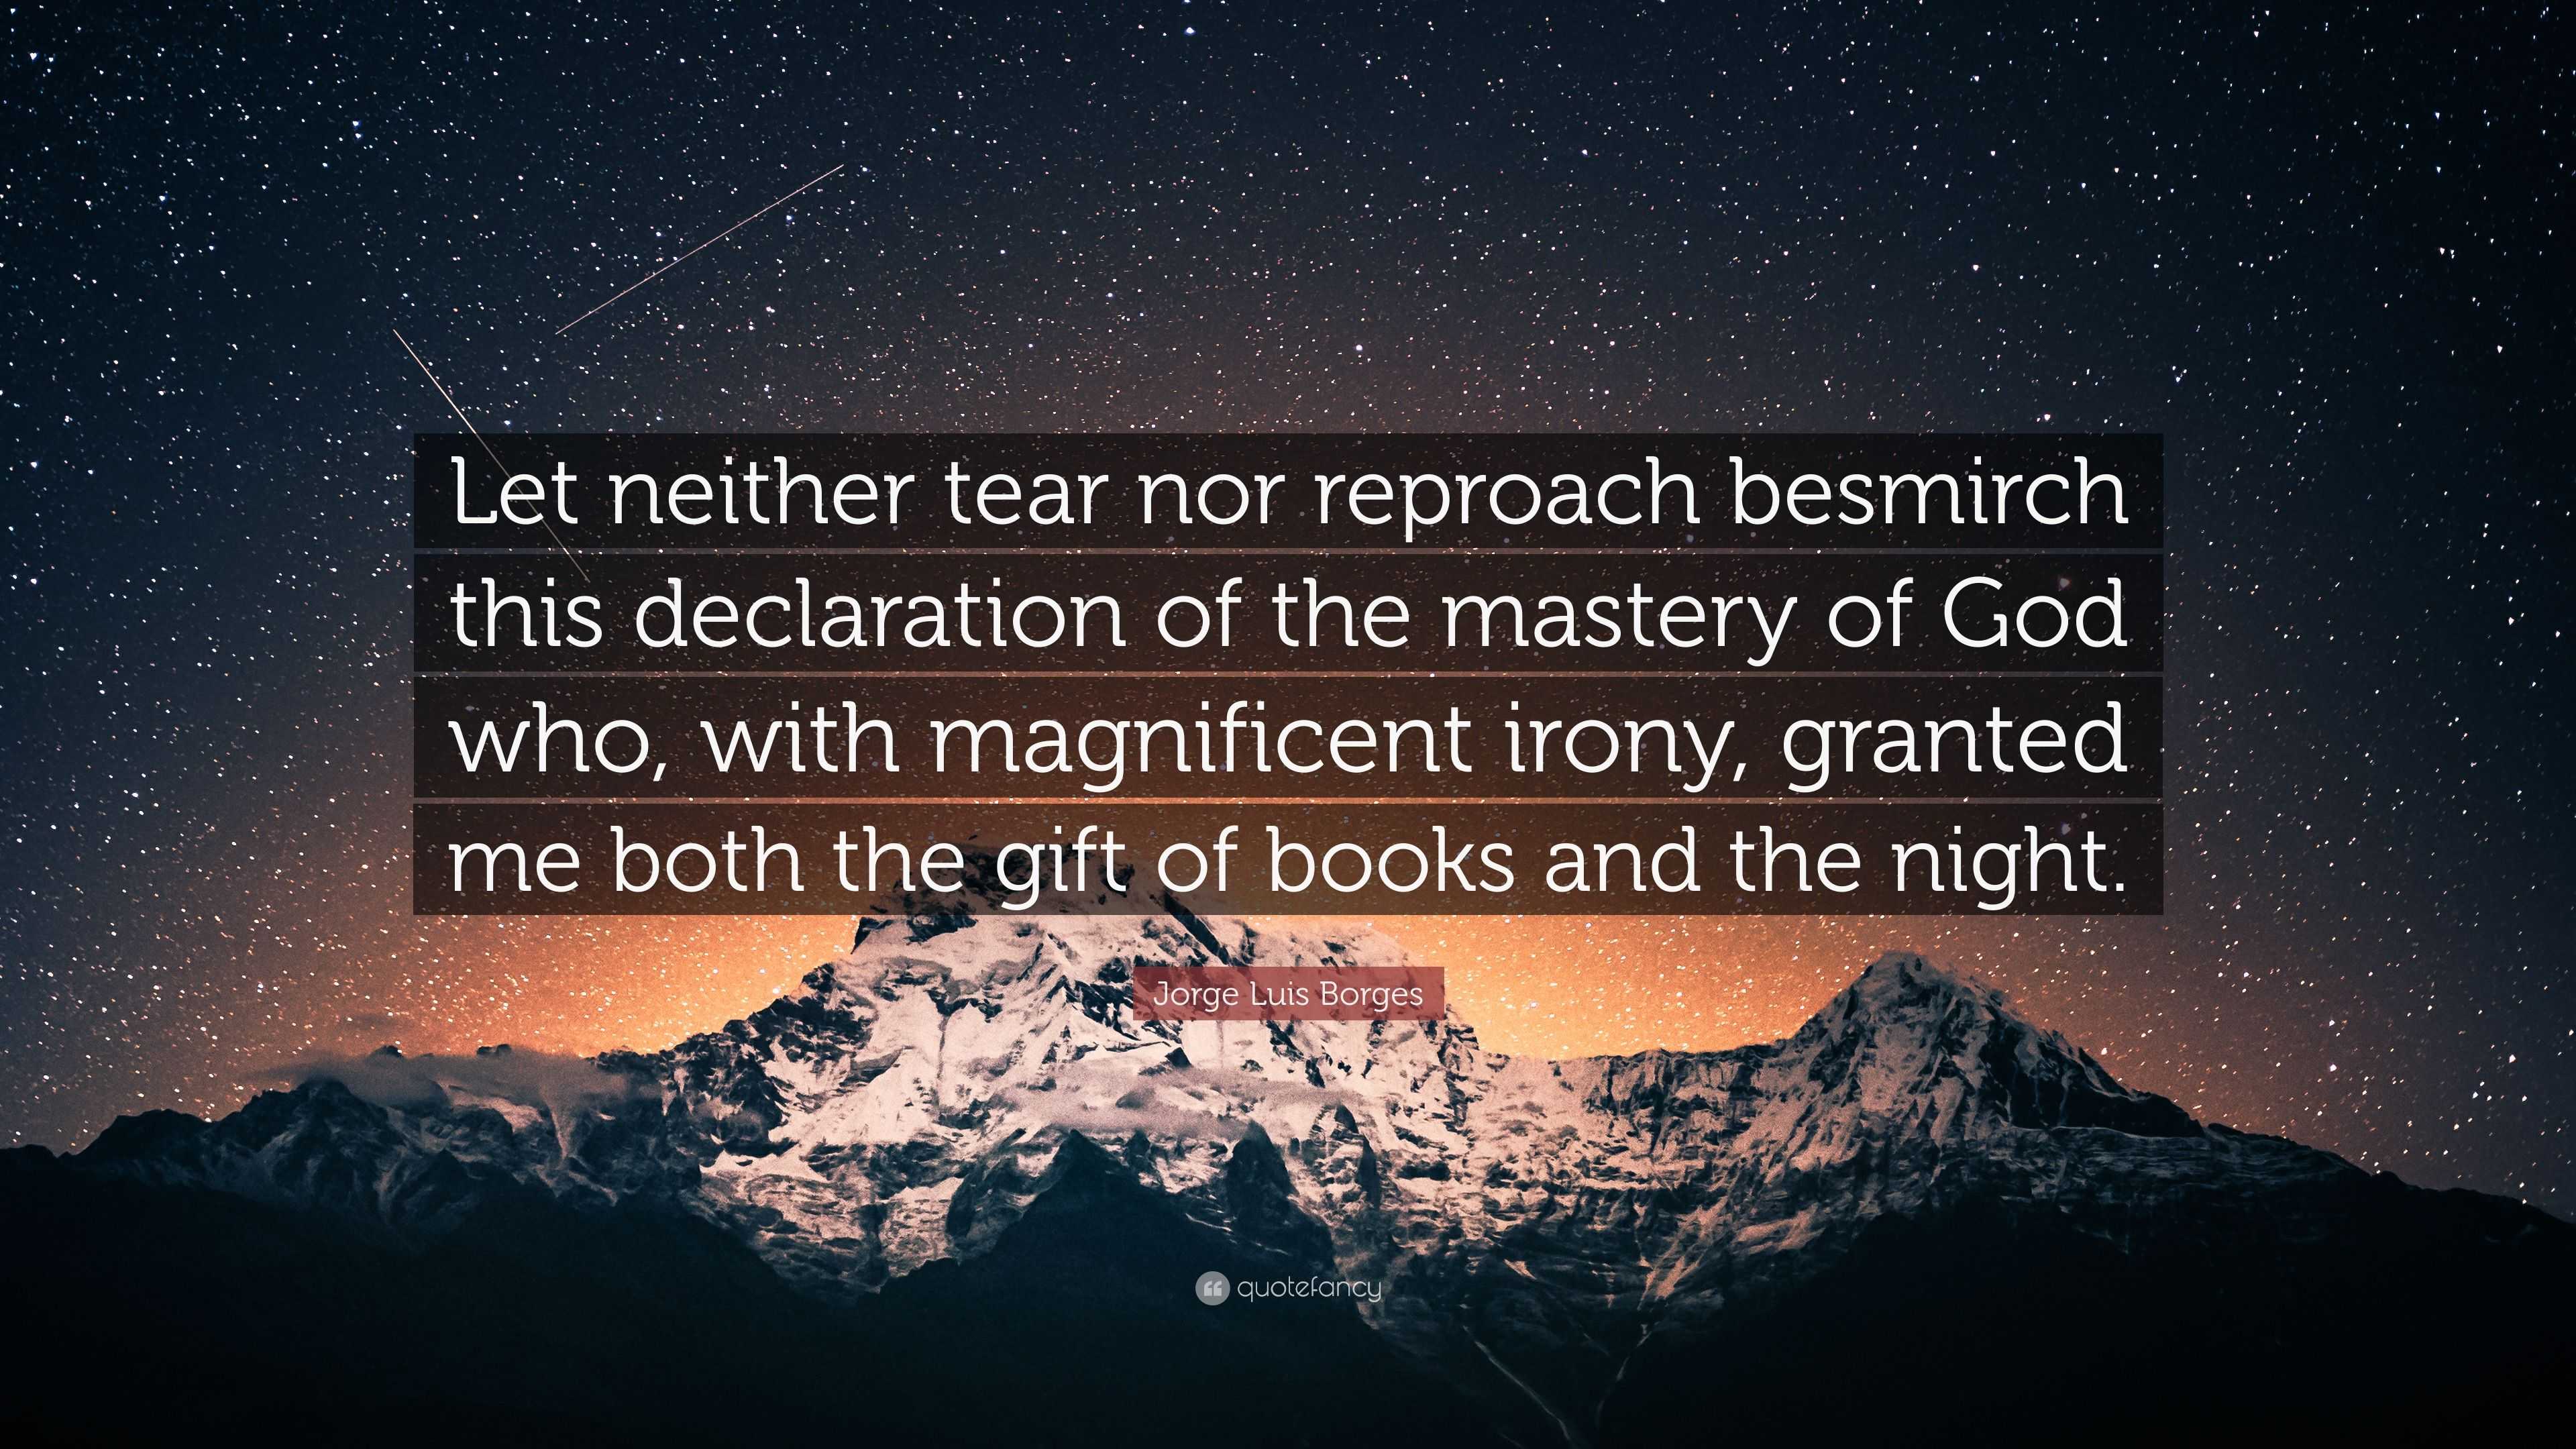 Jorge Luis Borges Quote: “Let neither tear nor reproach besmirch